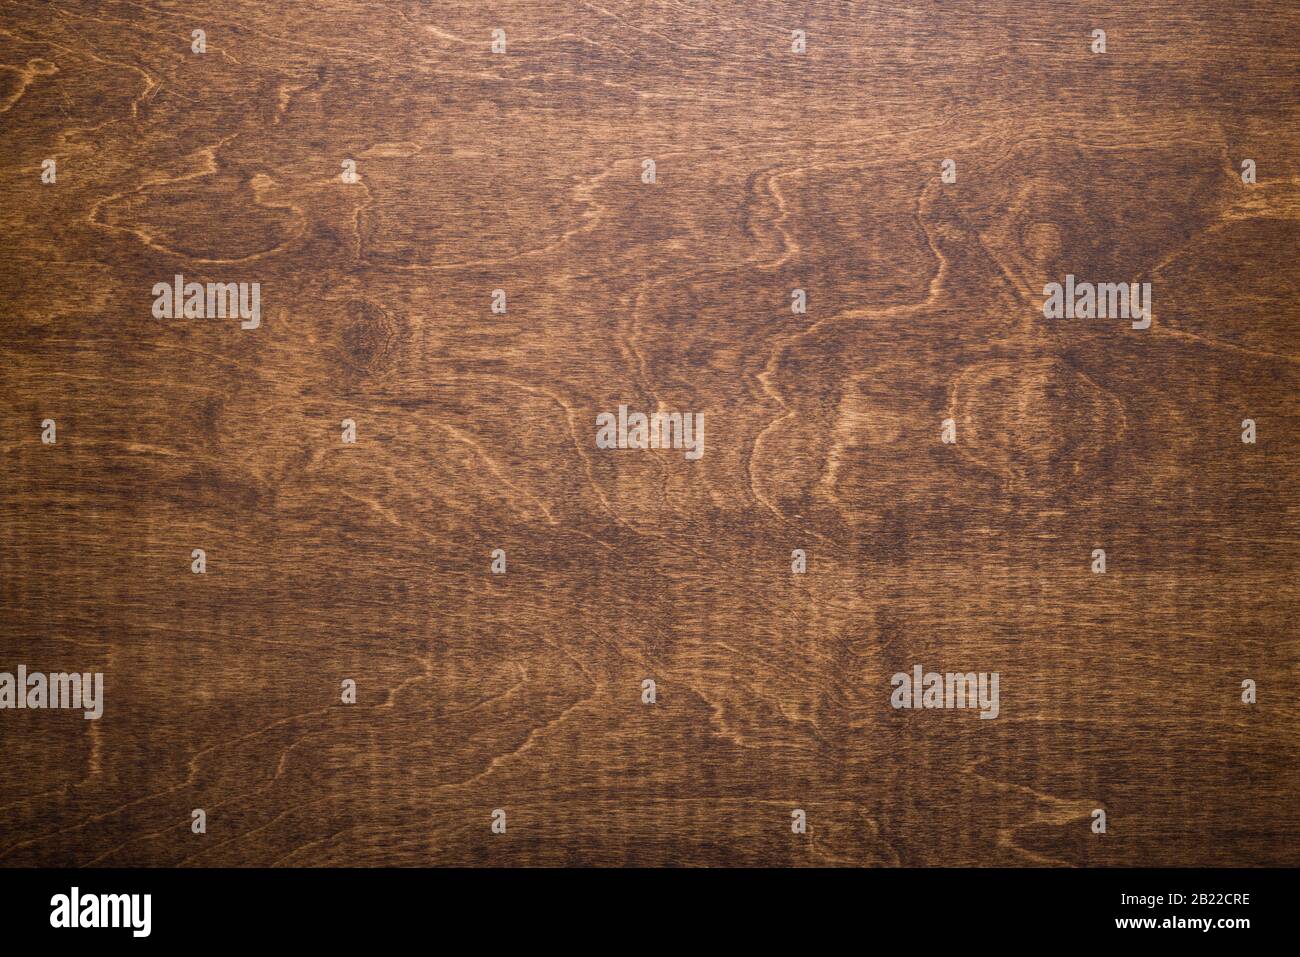 Dark brown wooden tabletop made of plywood. Stock Photo